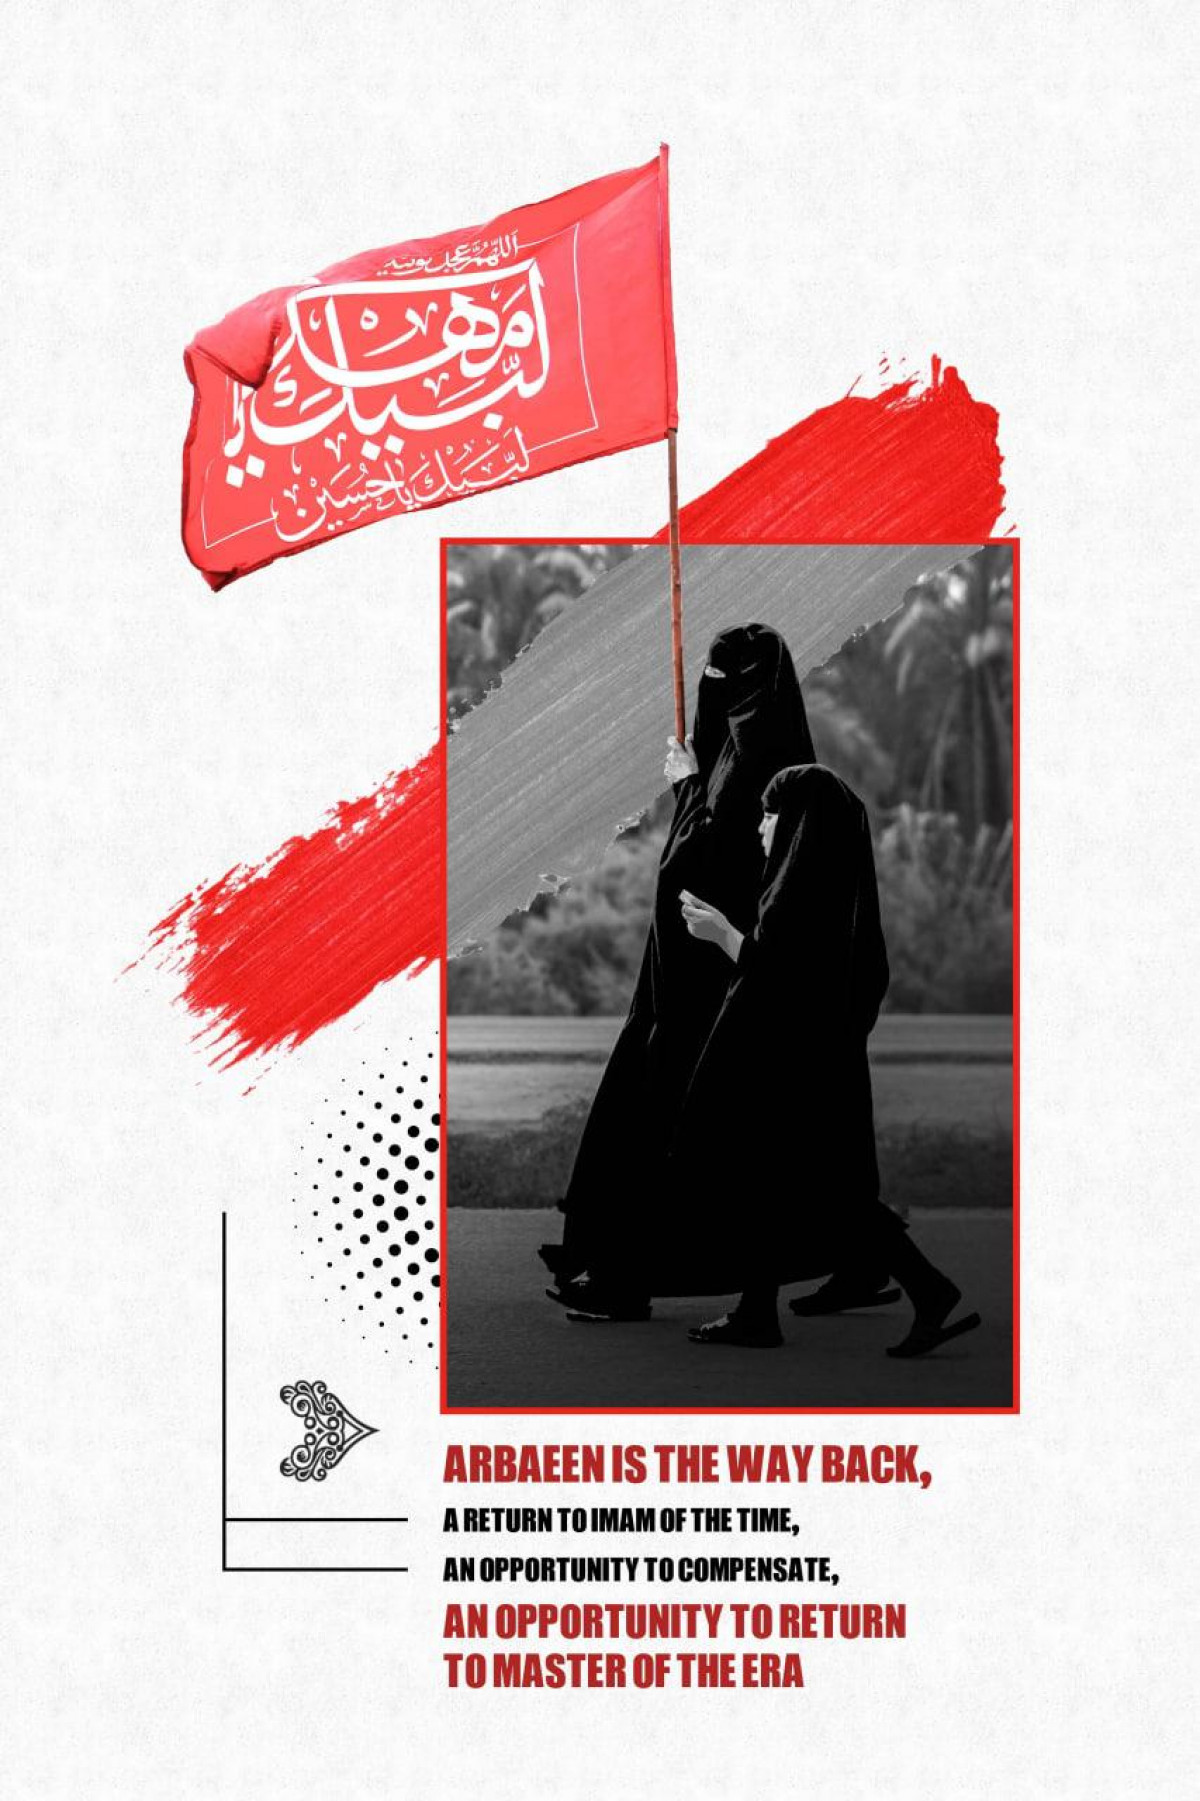 ARBAEEN IS THE WAY BACK